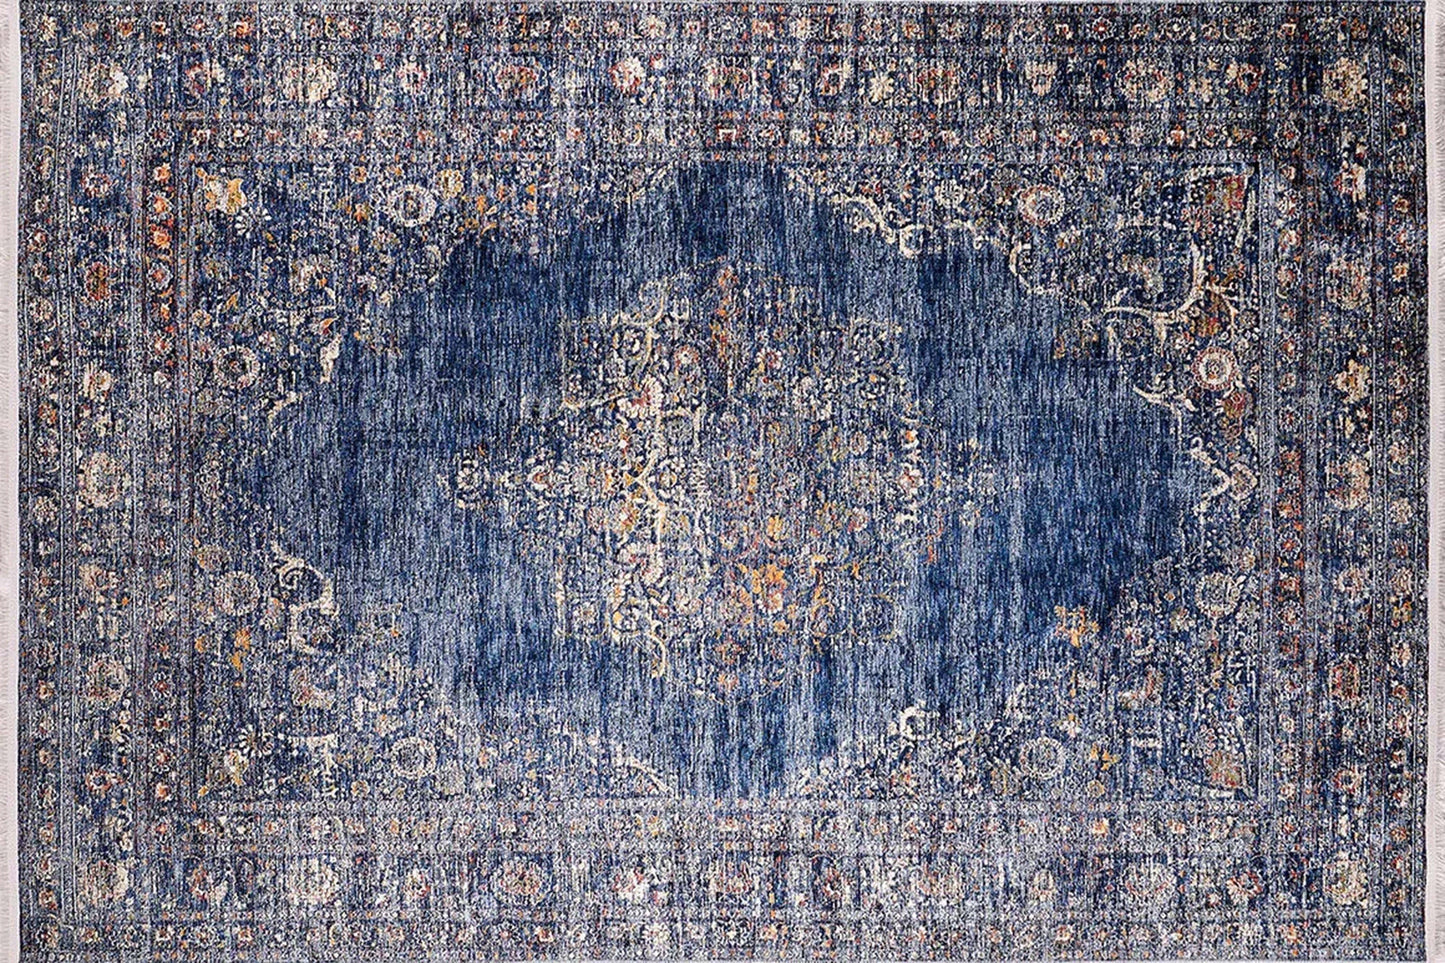 2x3 Turkish Blue Rug, Small Area Rugs 3x5 4x6 Traditional Vintage design Luxury Rugs for Kitchen Bathroom Bedside Bedroom Entryway Laundry - famerugs